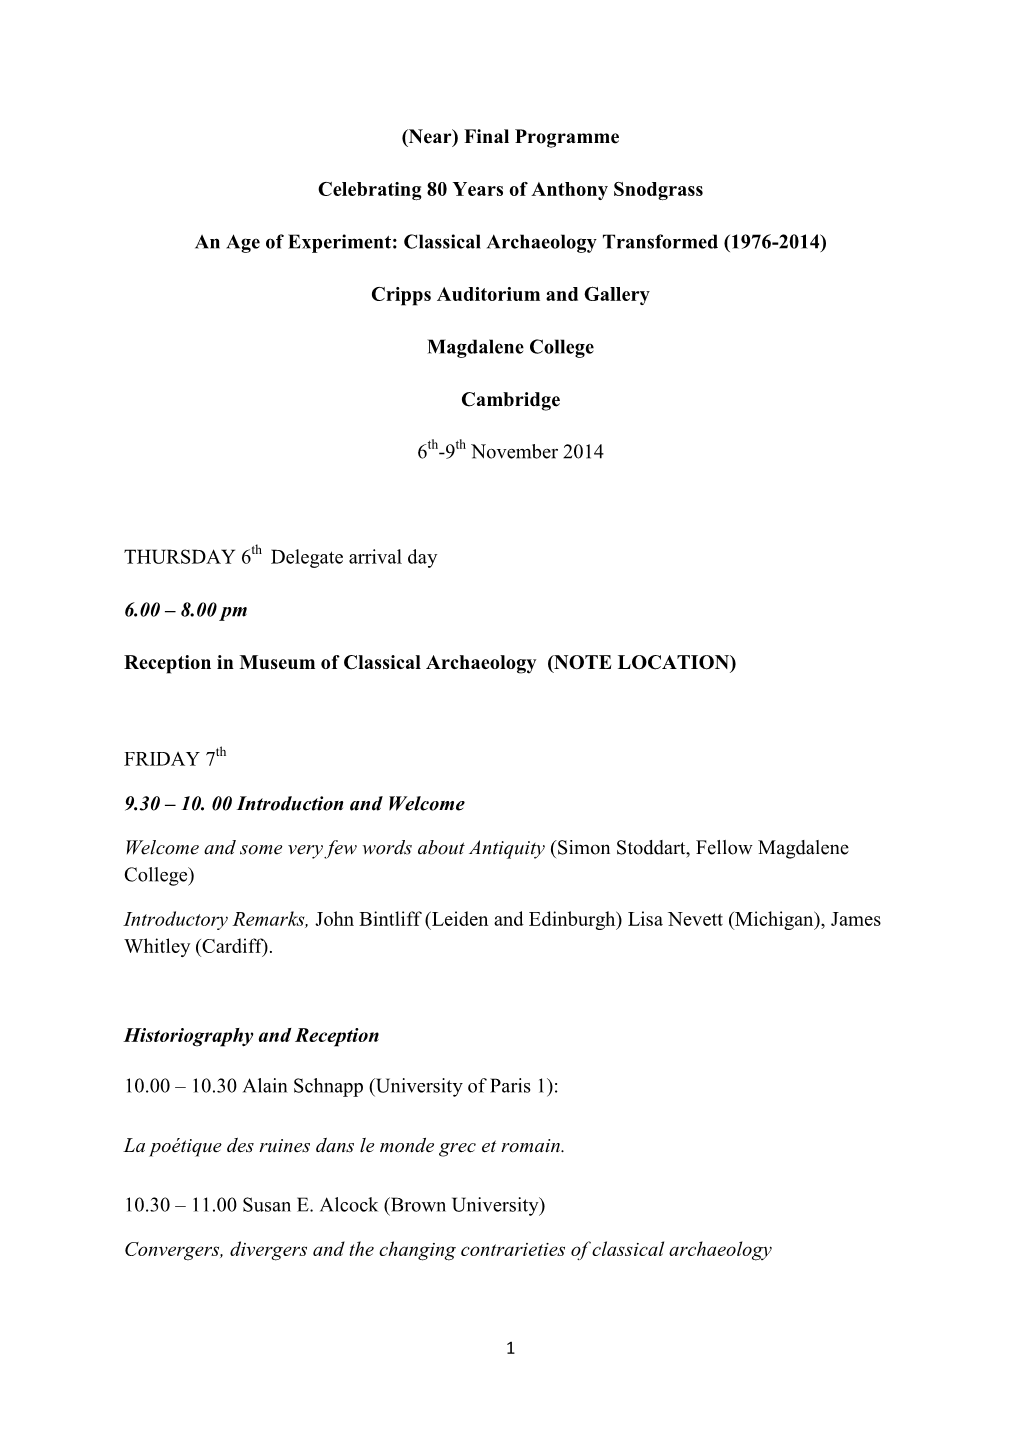 (Near) Final Programme Celebrating 80 Years of Anthony Snodgrass an Age of Experiment: Classical Archaeology Transformed (1976-2